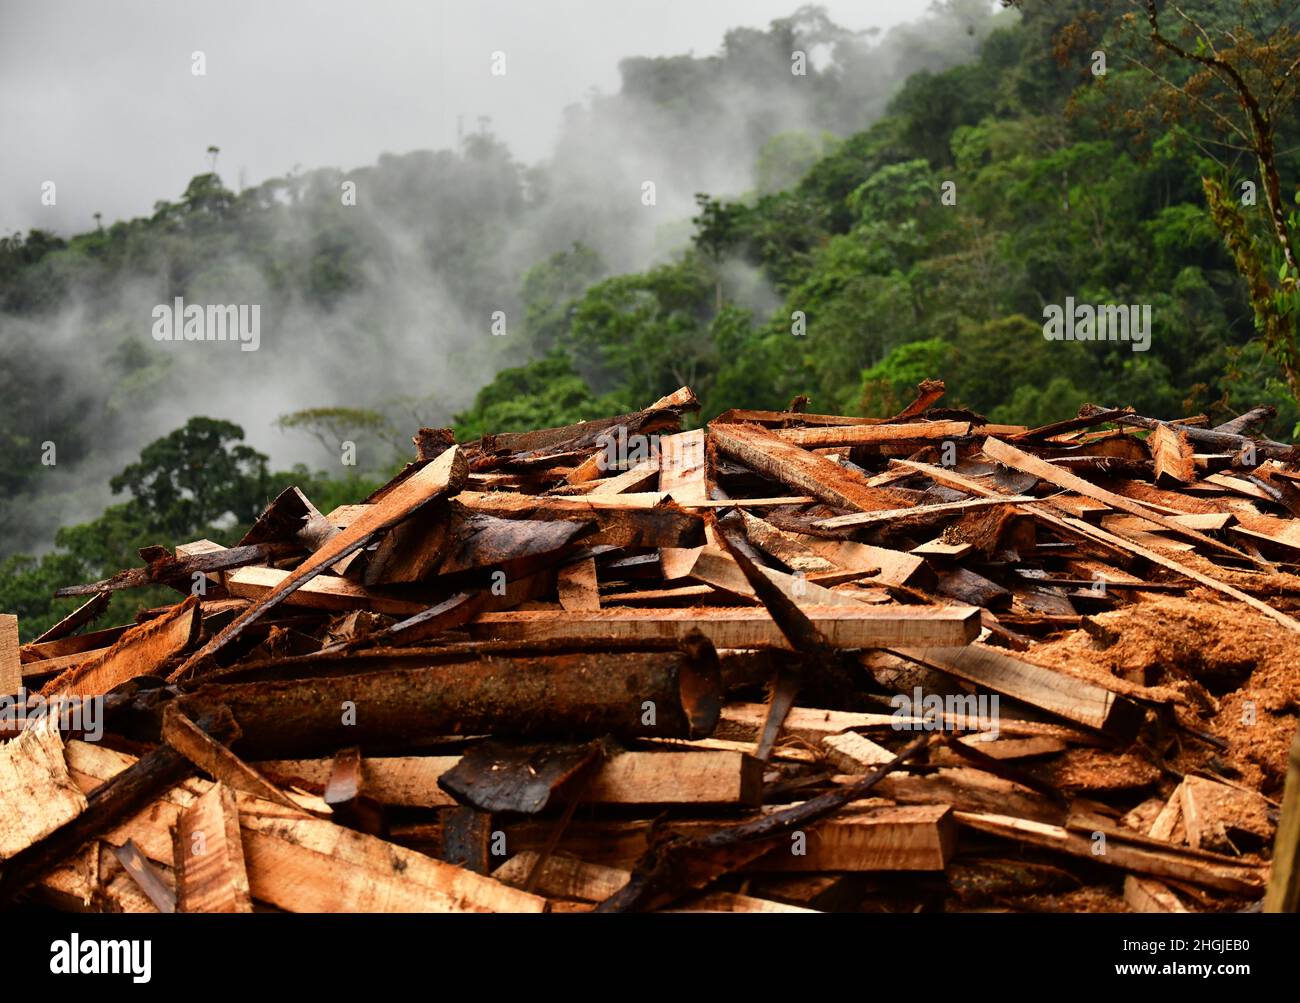 A logging site in the rainforest. Mature hardwood trees have been felled. Colombia, South America Stock Photo